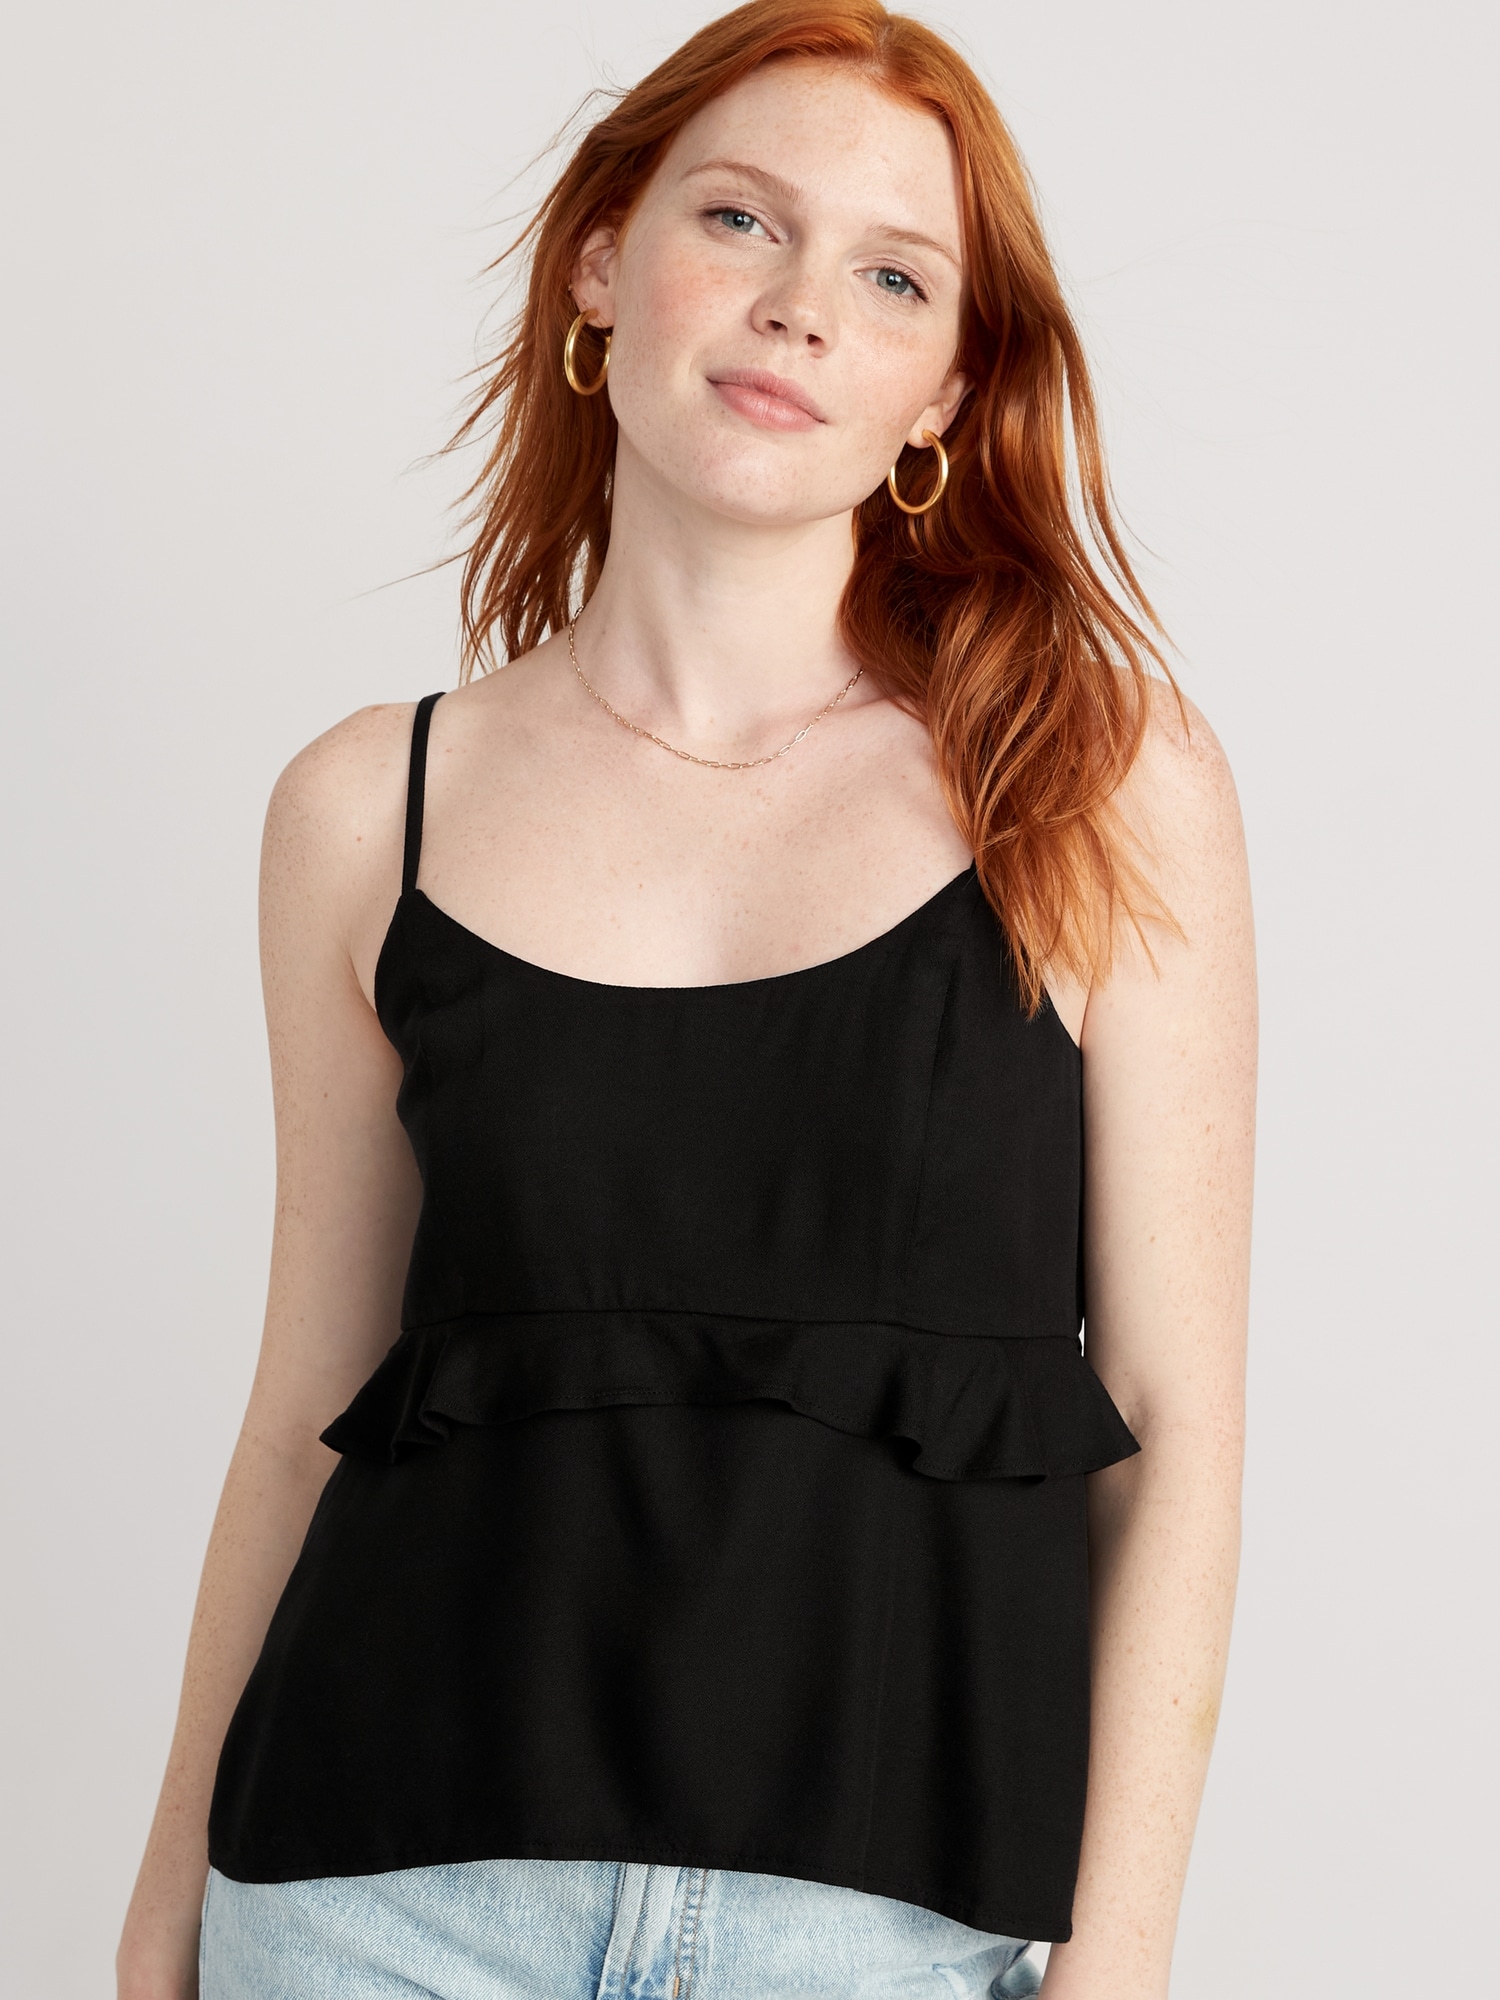 Old Navy Women's Fitted Cami Tank Top Black XL - $15 - From Susan